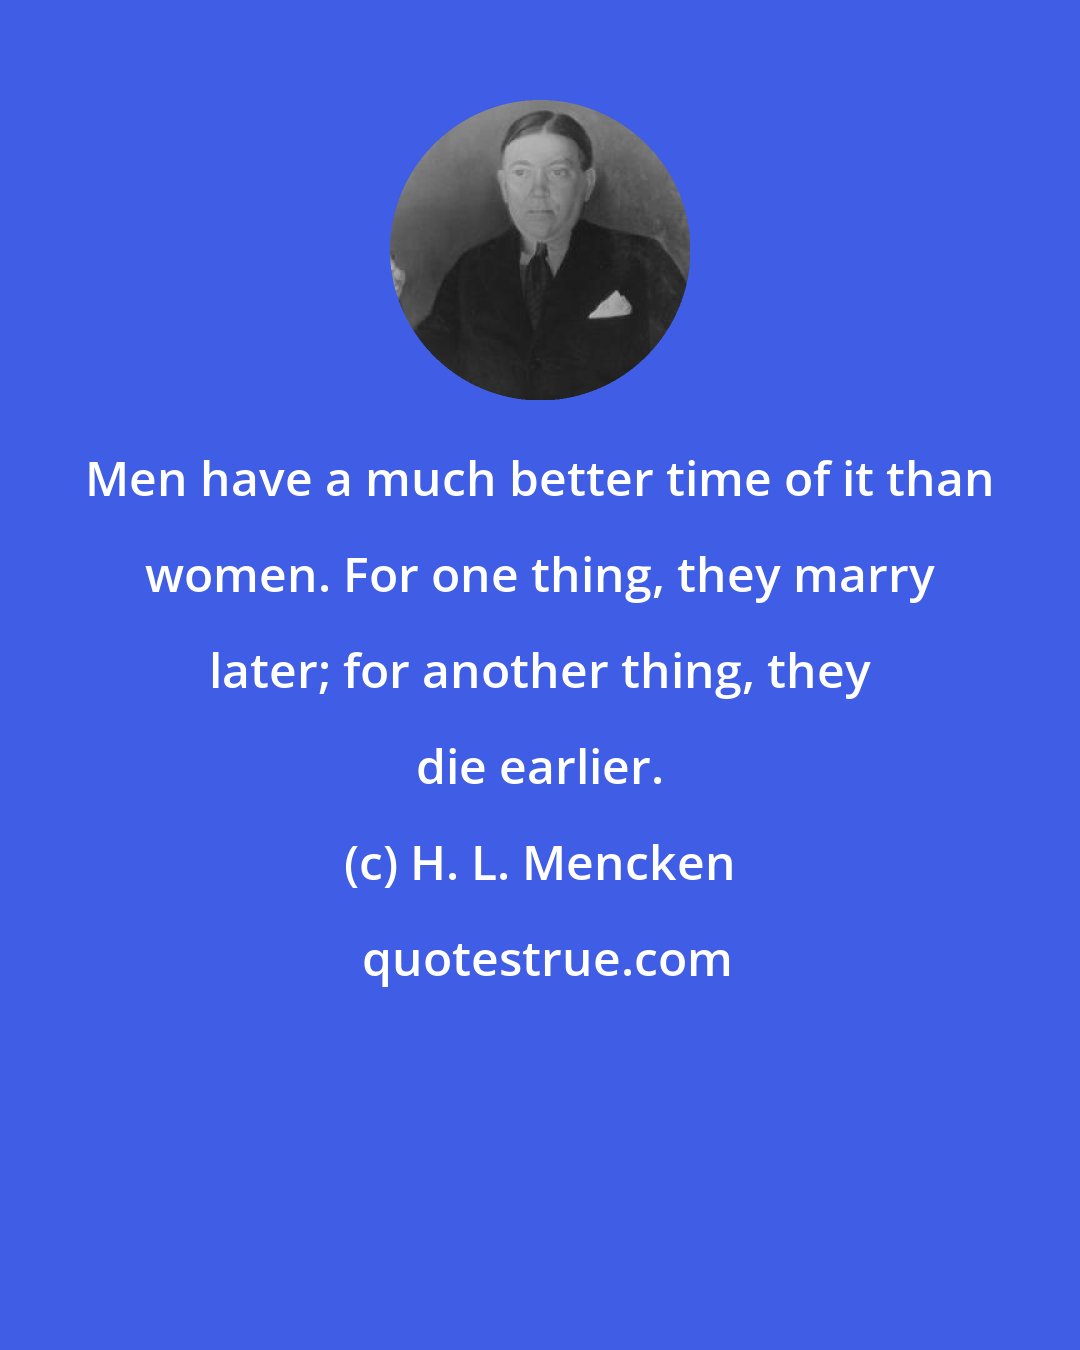 H. L. Mencken: Men have a much better time of it than women. For one thing, they marry later; for another thing, they die earlier.